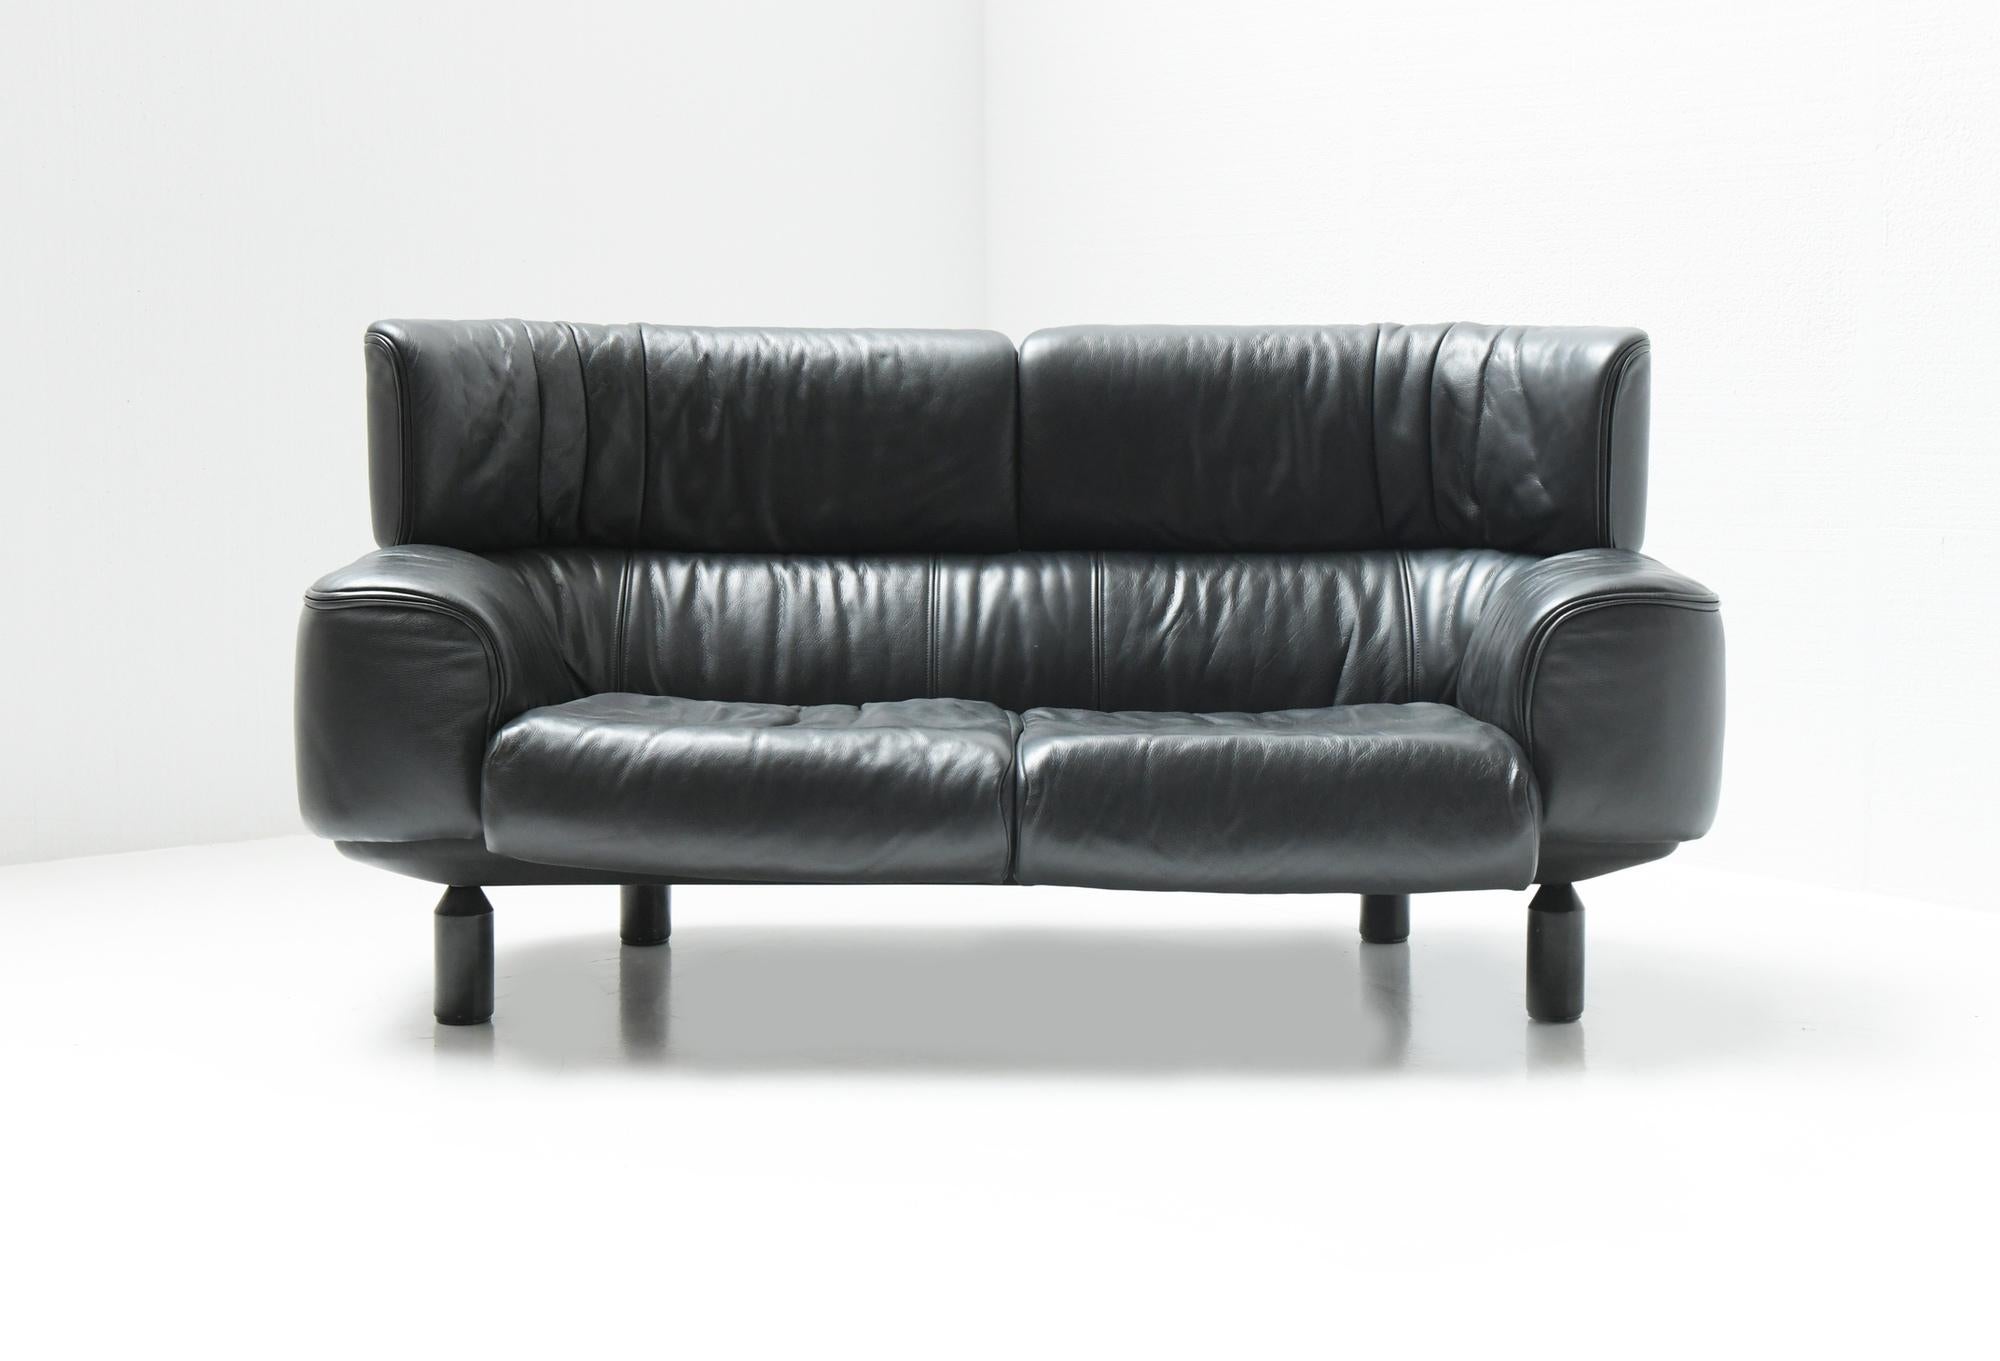 Stunning Bull sofa in a mint vintage condition.
Original dark grey leather with the perfect patina!

Designed by Vico Magistretti and only produced for 1 year by CASSINA : 1987

Dimensions :
W 195 x D 84 x H 83 cm.